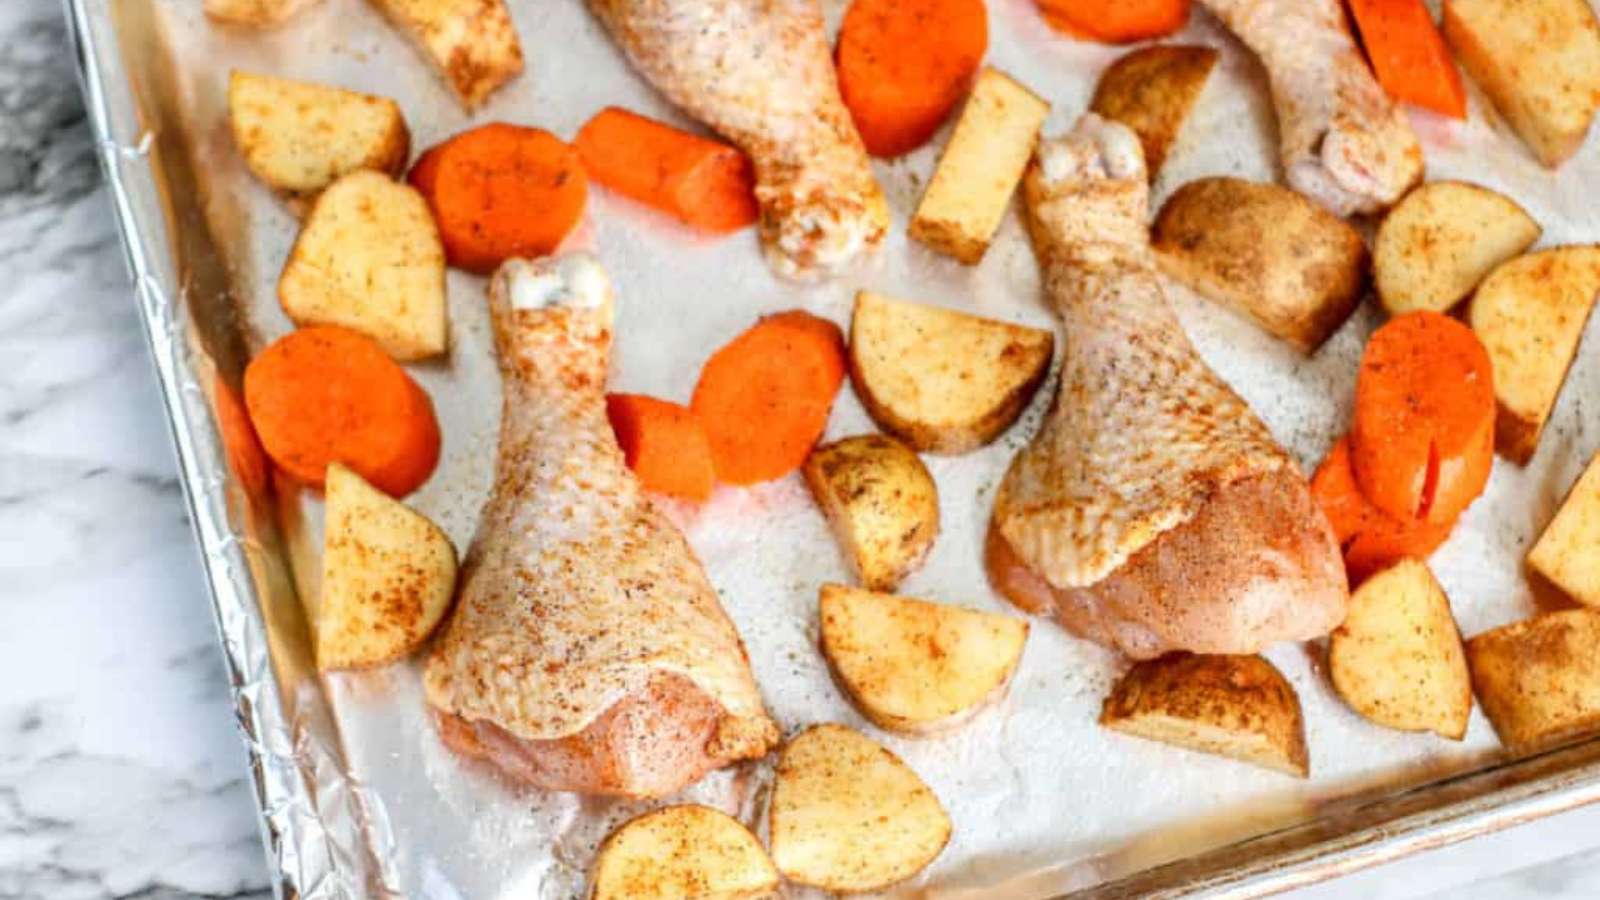 Roasted chicken with carrots and potatoes on a baking sheet.